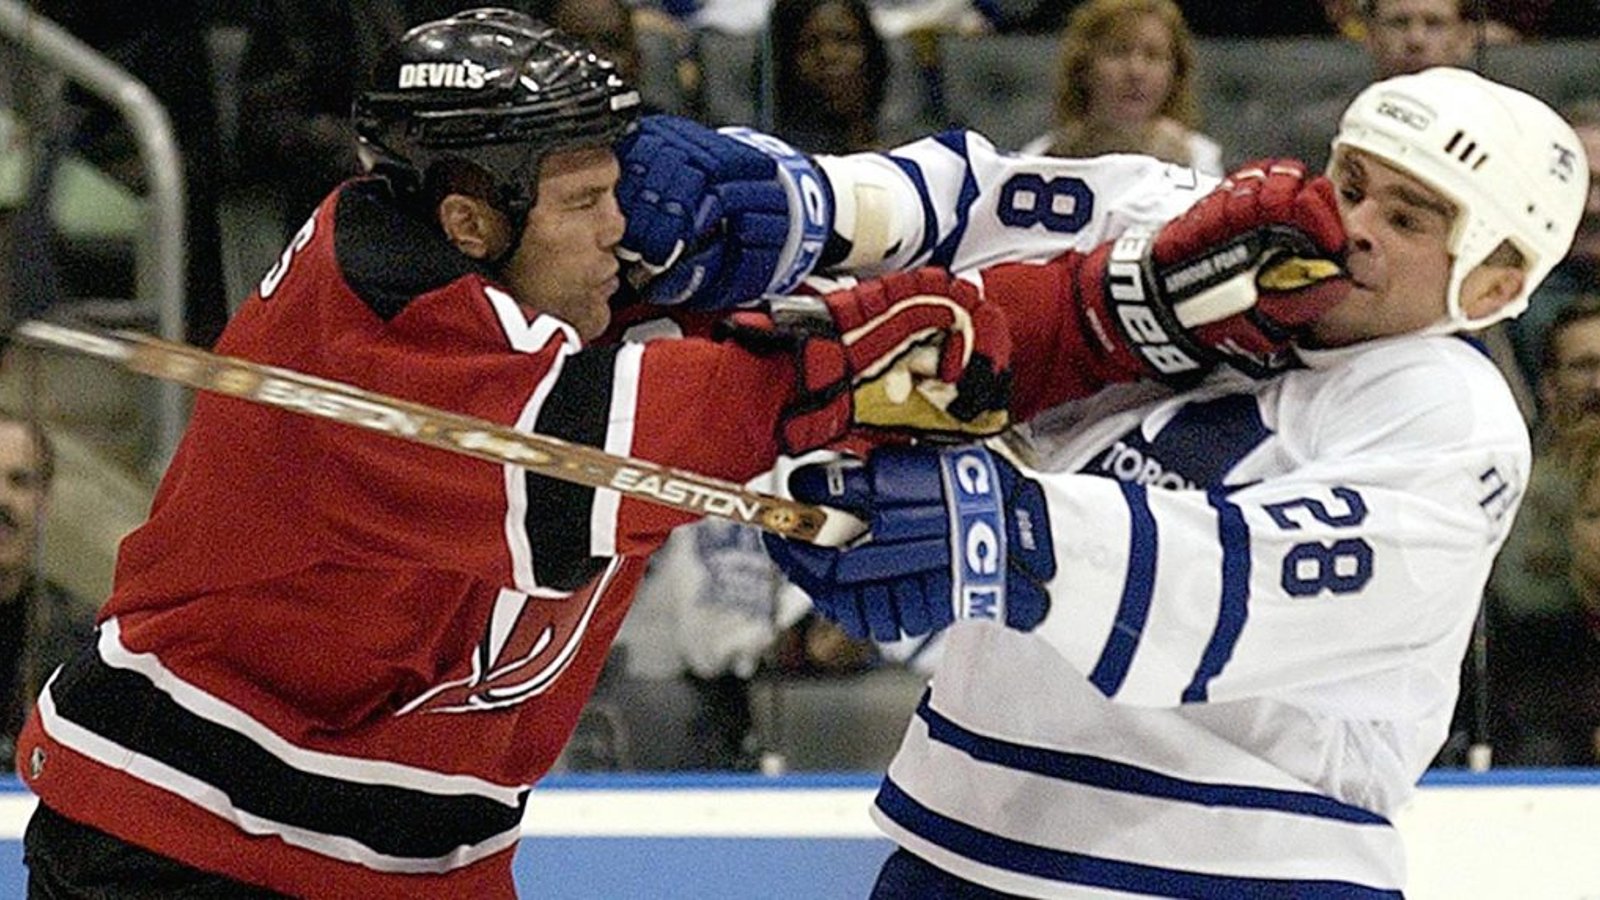 Tie Domi calls Scott Stevens the “biggest phony he ever played against”